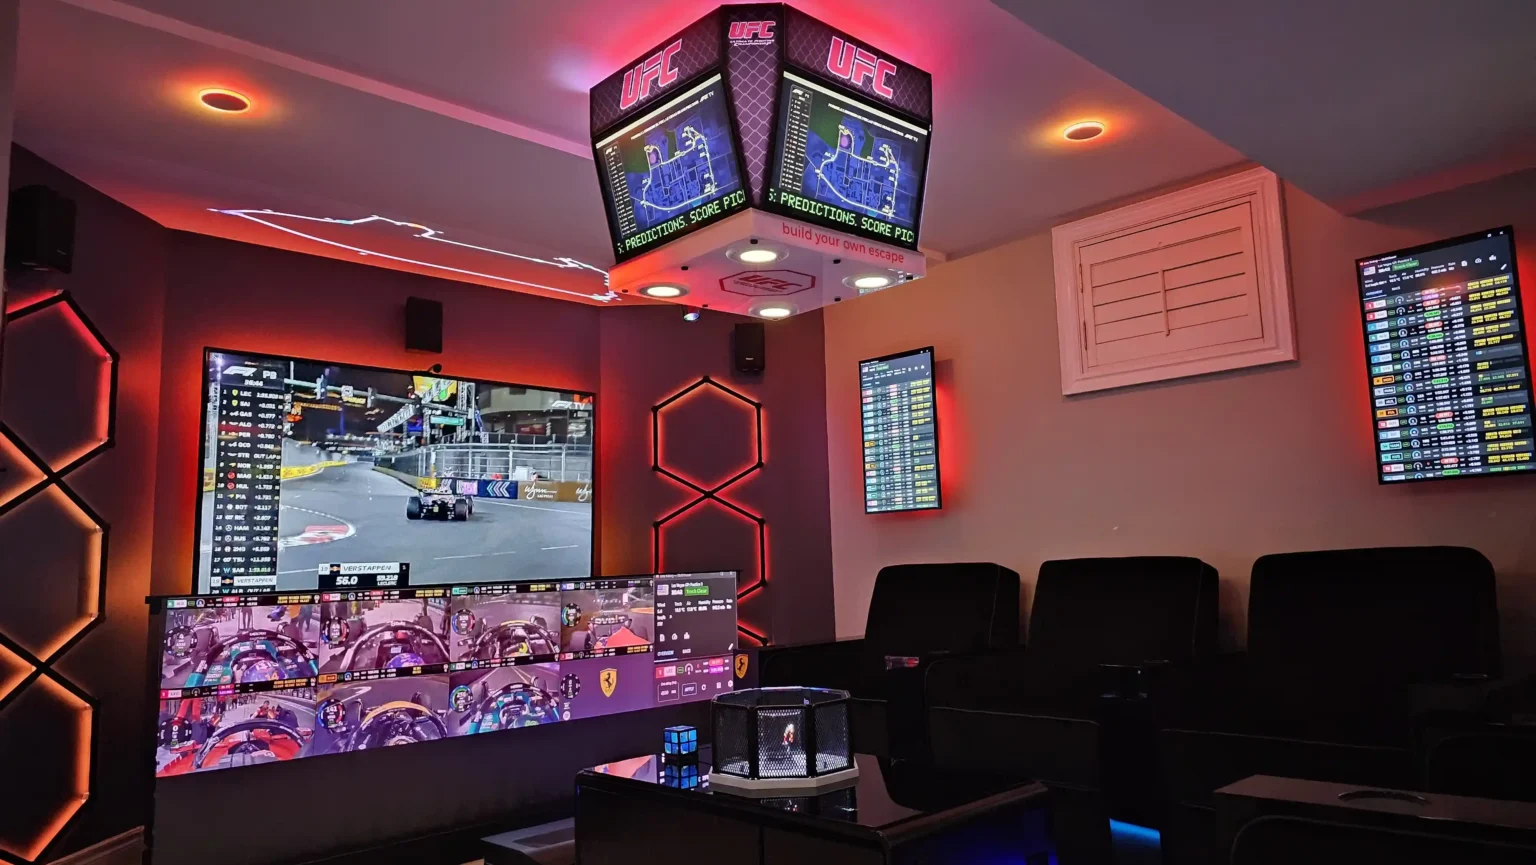 Hussain’s basement viral transformation video of the ultimate man cave.